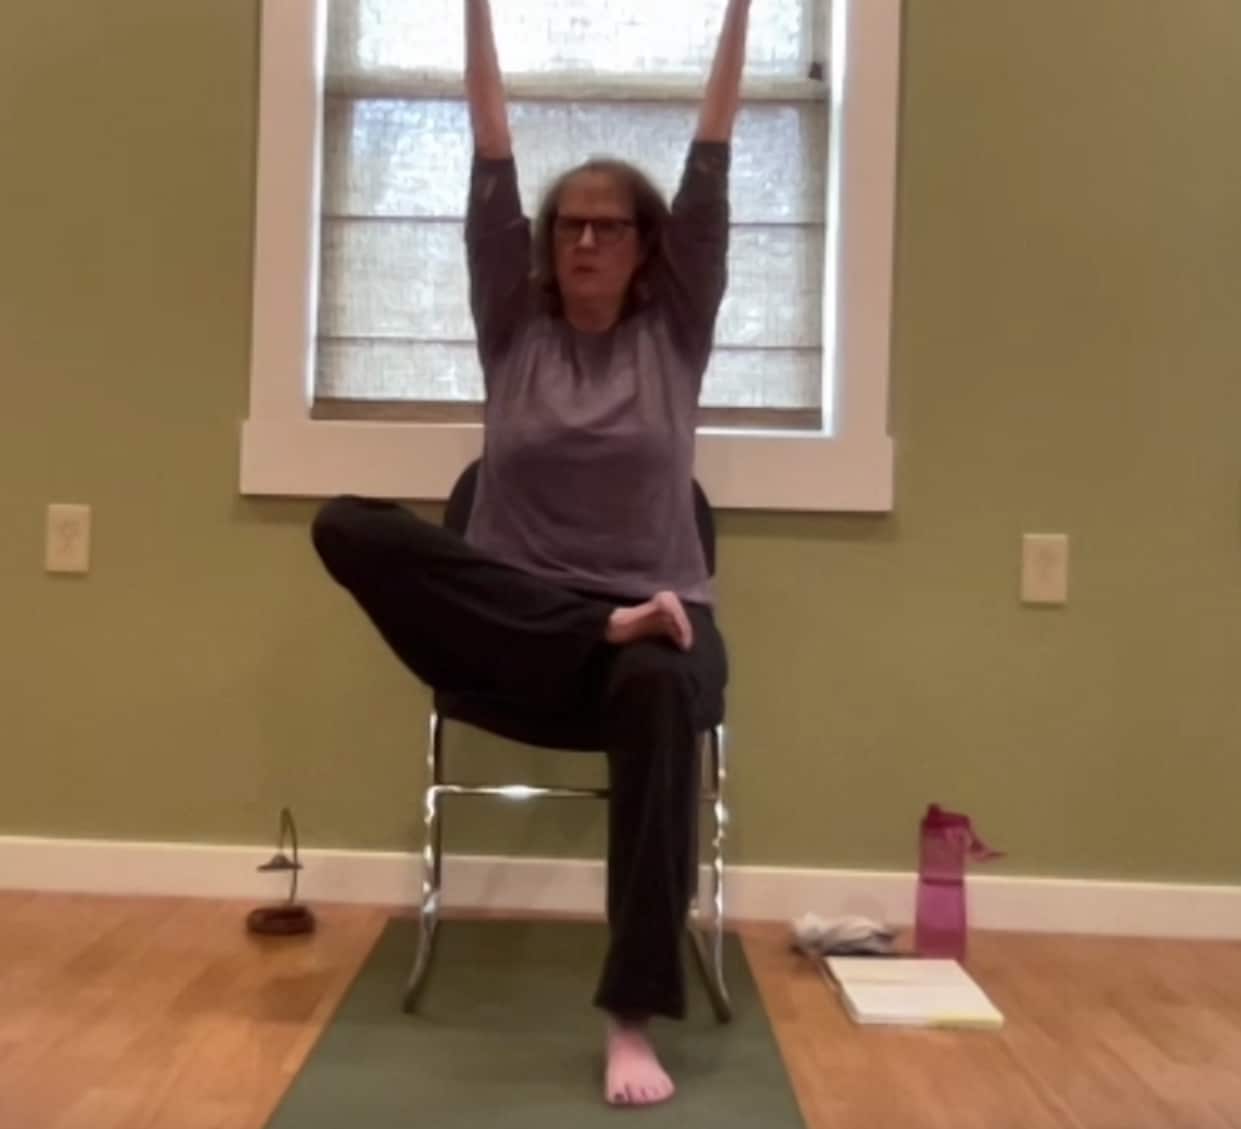 Chair Yoga for Seniors: A Gentle and Effective Exercise Option